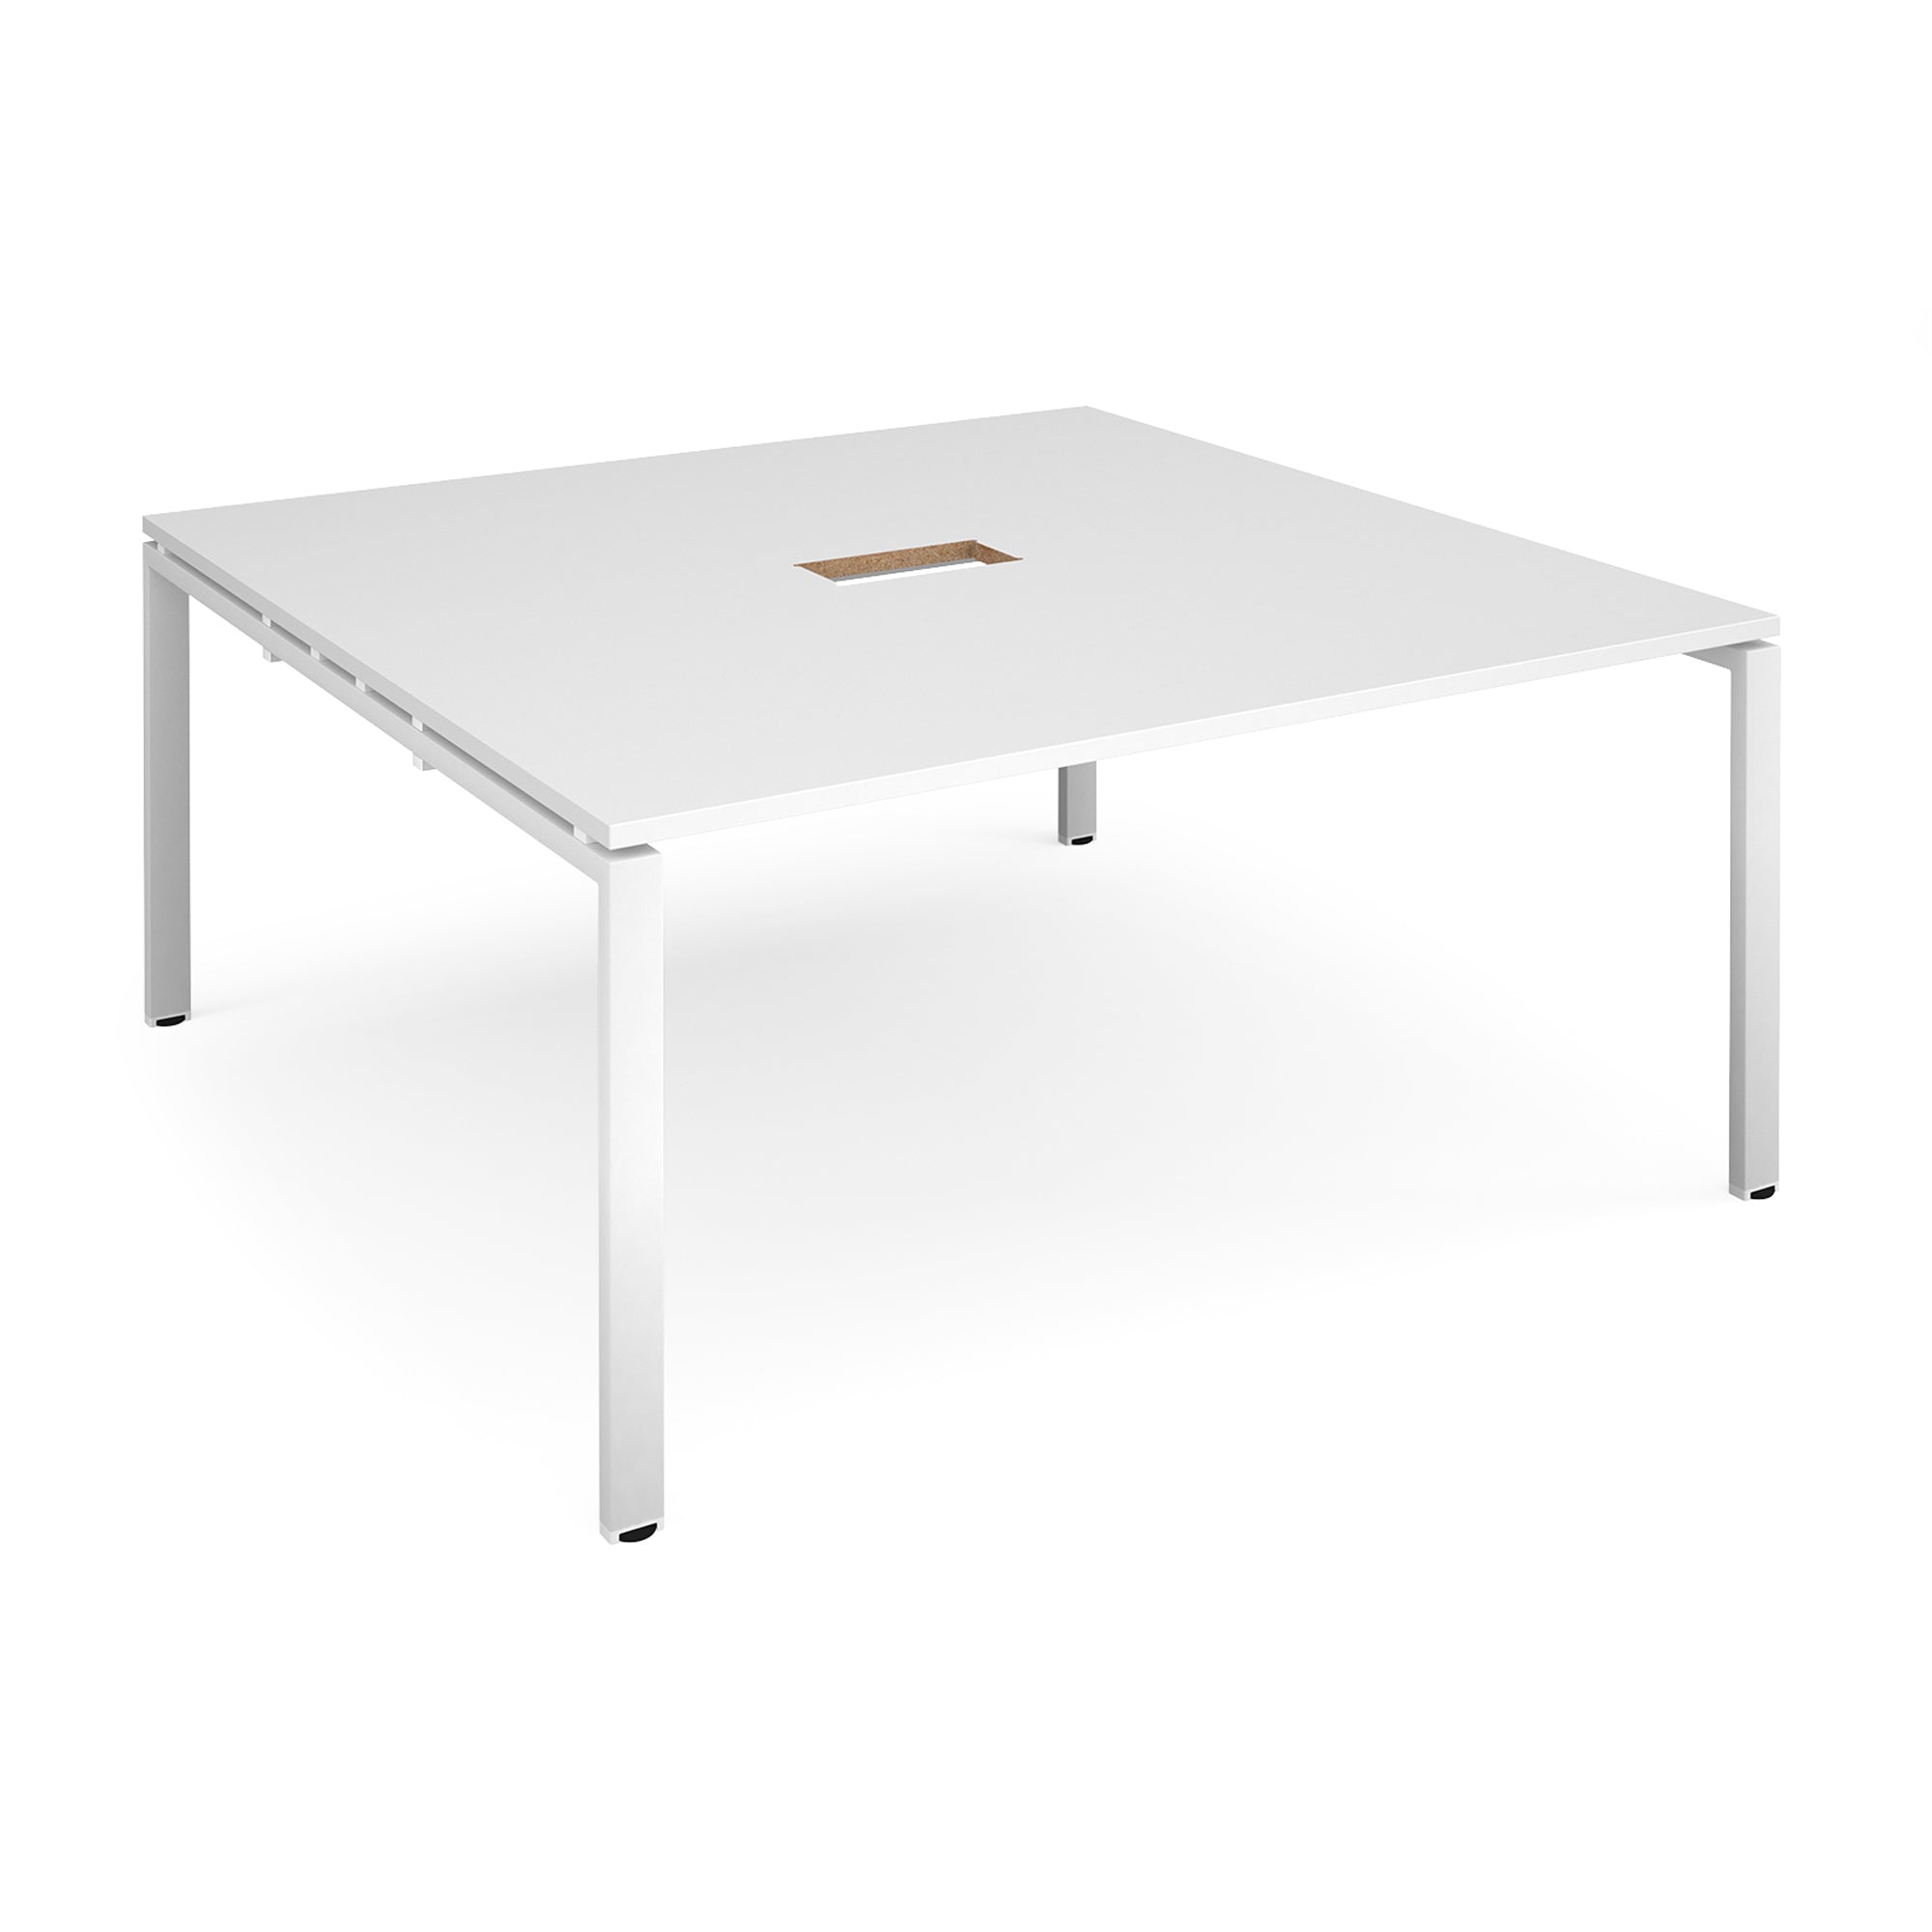 Adapt square boardroom table with central cutout - Office Products Online